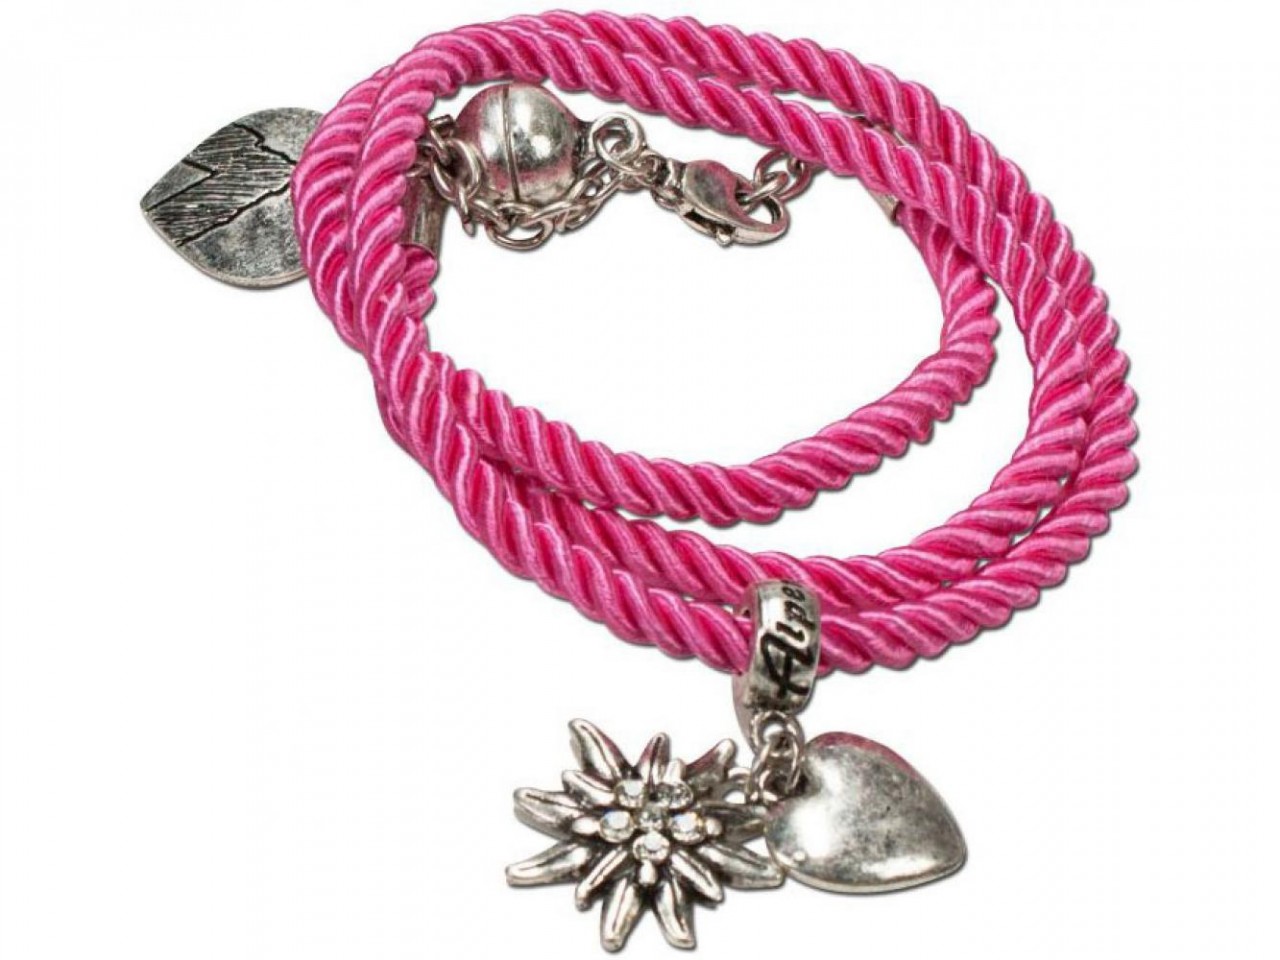 Braided Bracelet with Silver Charms, Pink